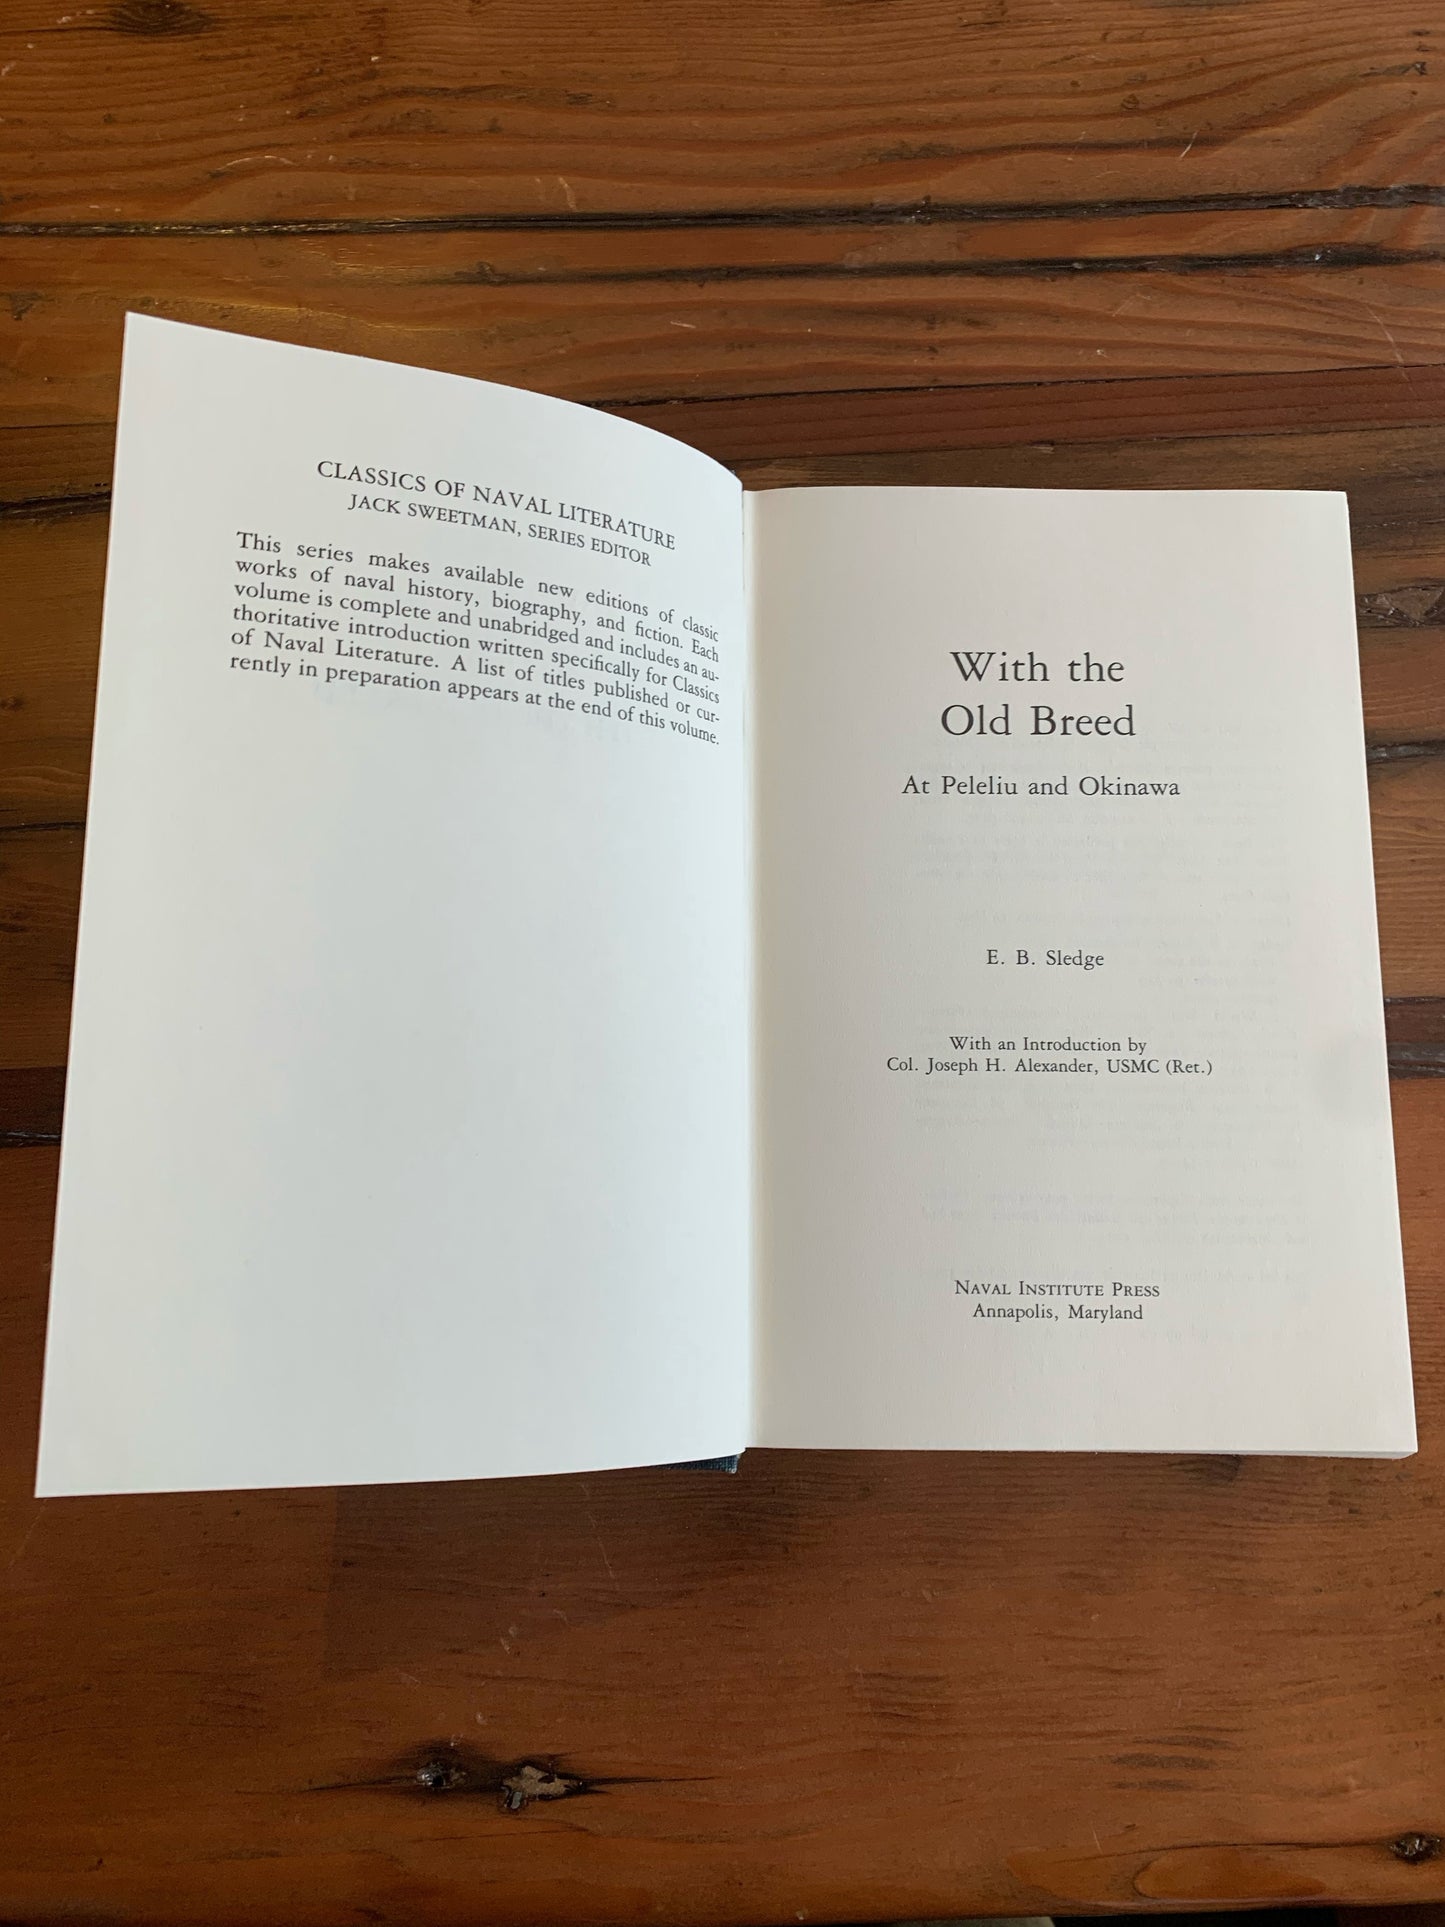 Book, "With the Old Breed" At Peleliu and Okinawa